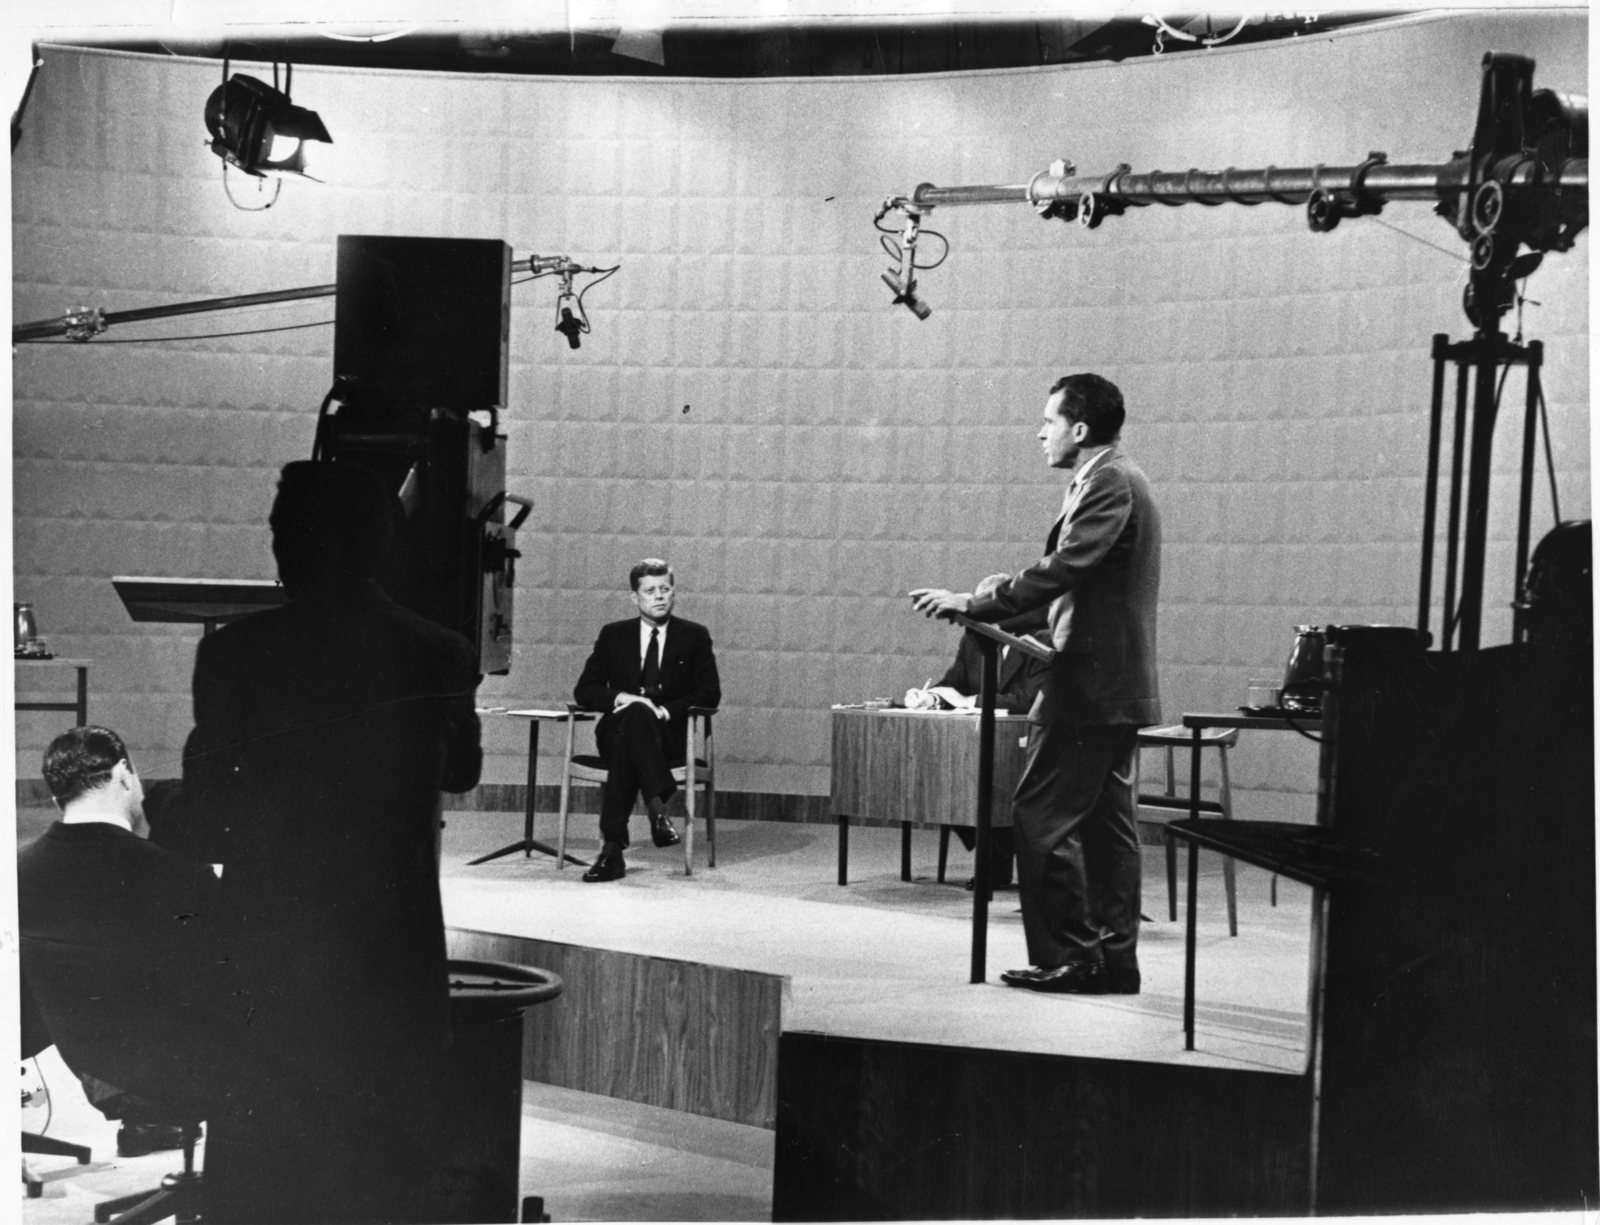 Richard Nixon and John F. Kennedy debate in Chicago while being televised, 9/26/1960